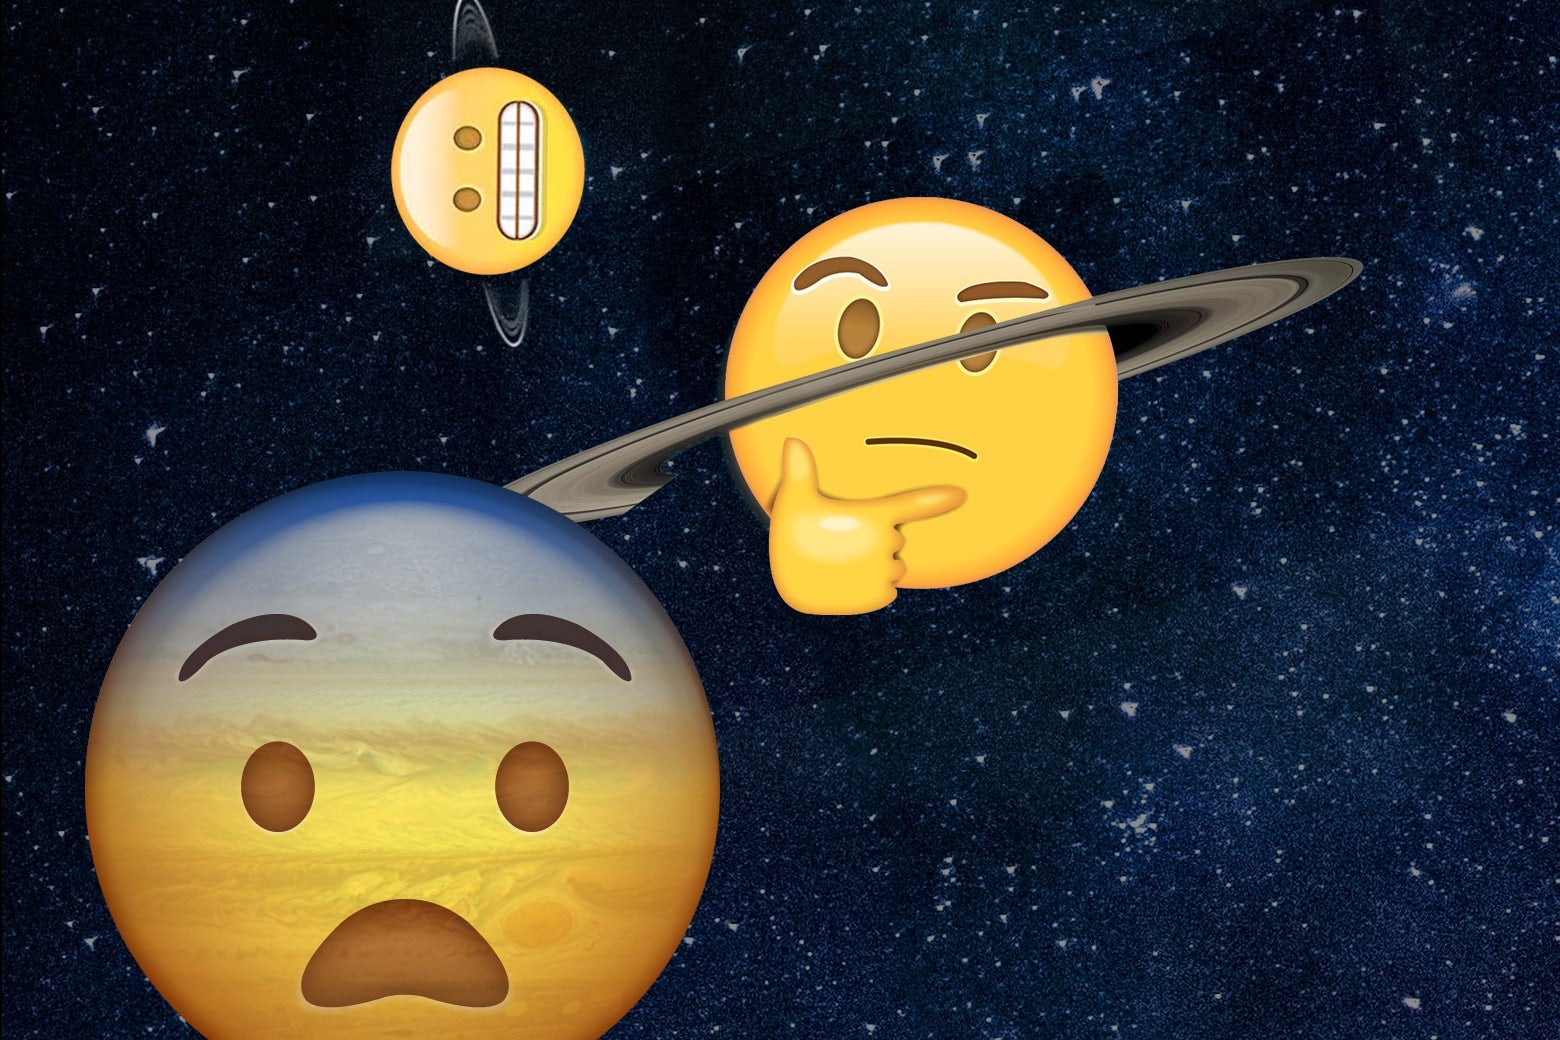 The fearful, thinking, and grimace emojis as planets.